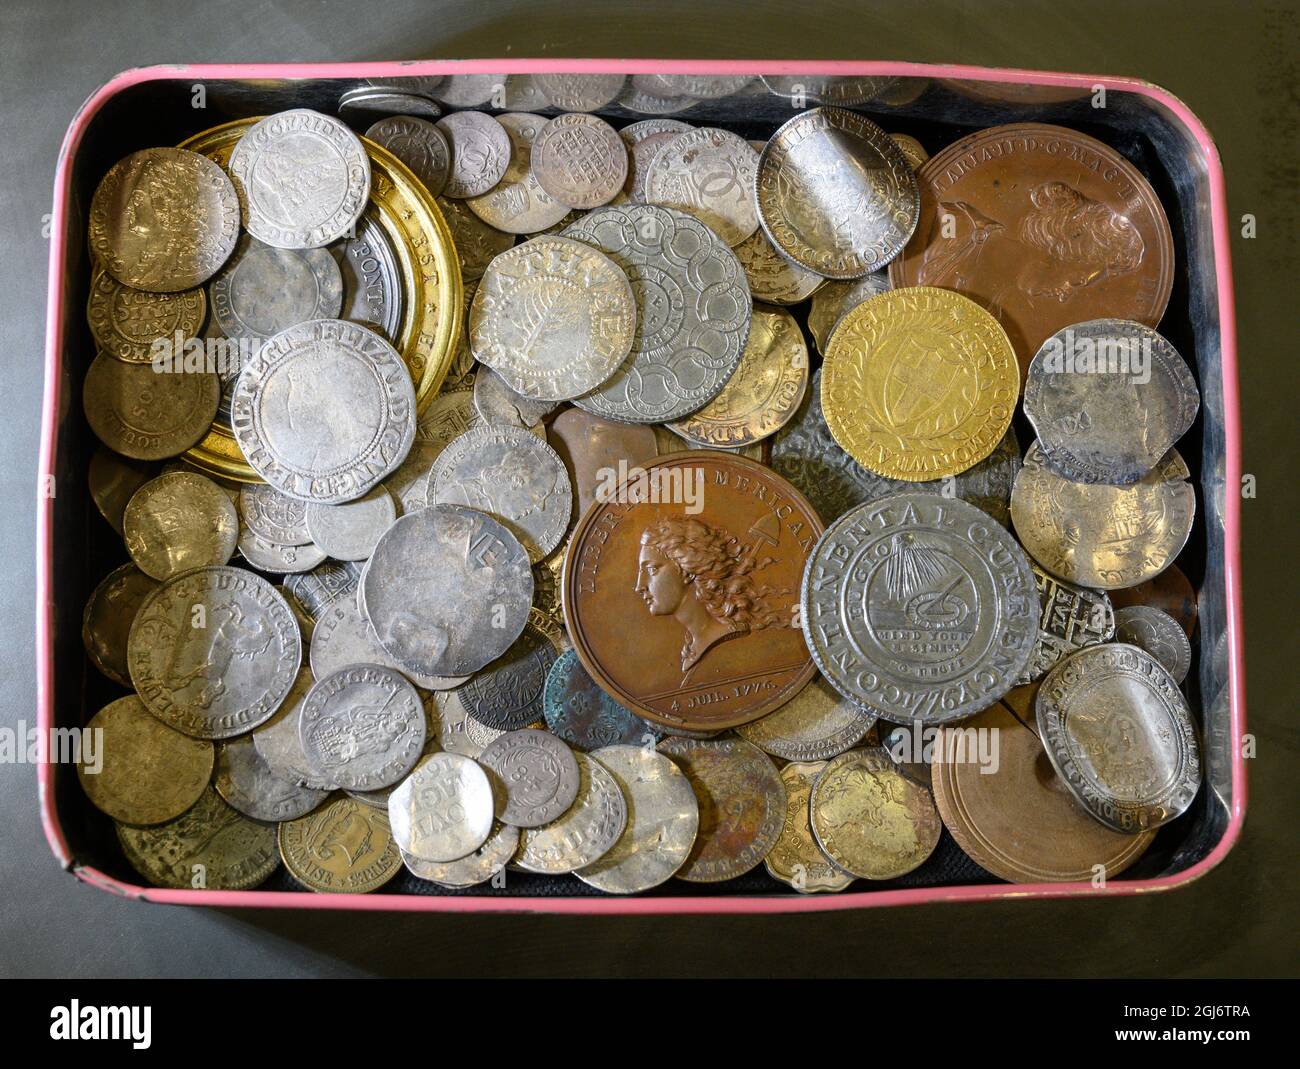 Morton & Eden, London, UK. 9 September 2021. A vintage sweet tin of coins  in Morton & Eden's Autumn sale includes several interesting early pieces  from the American Colonial period. An ancestor